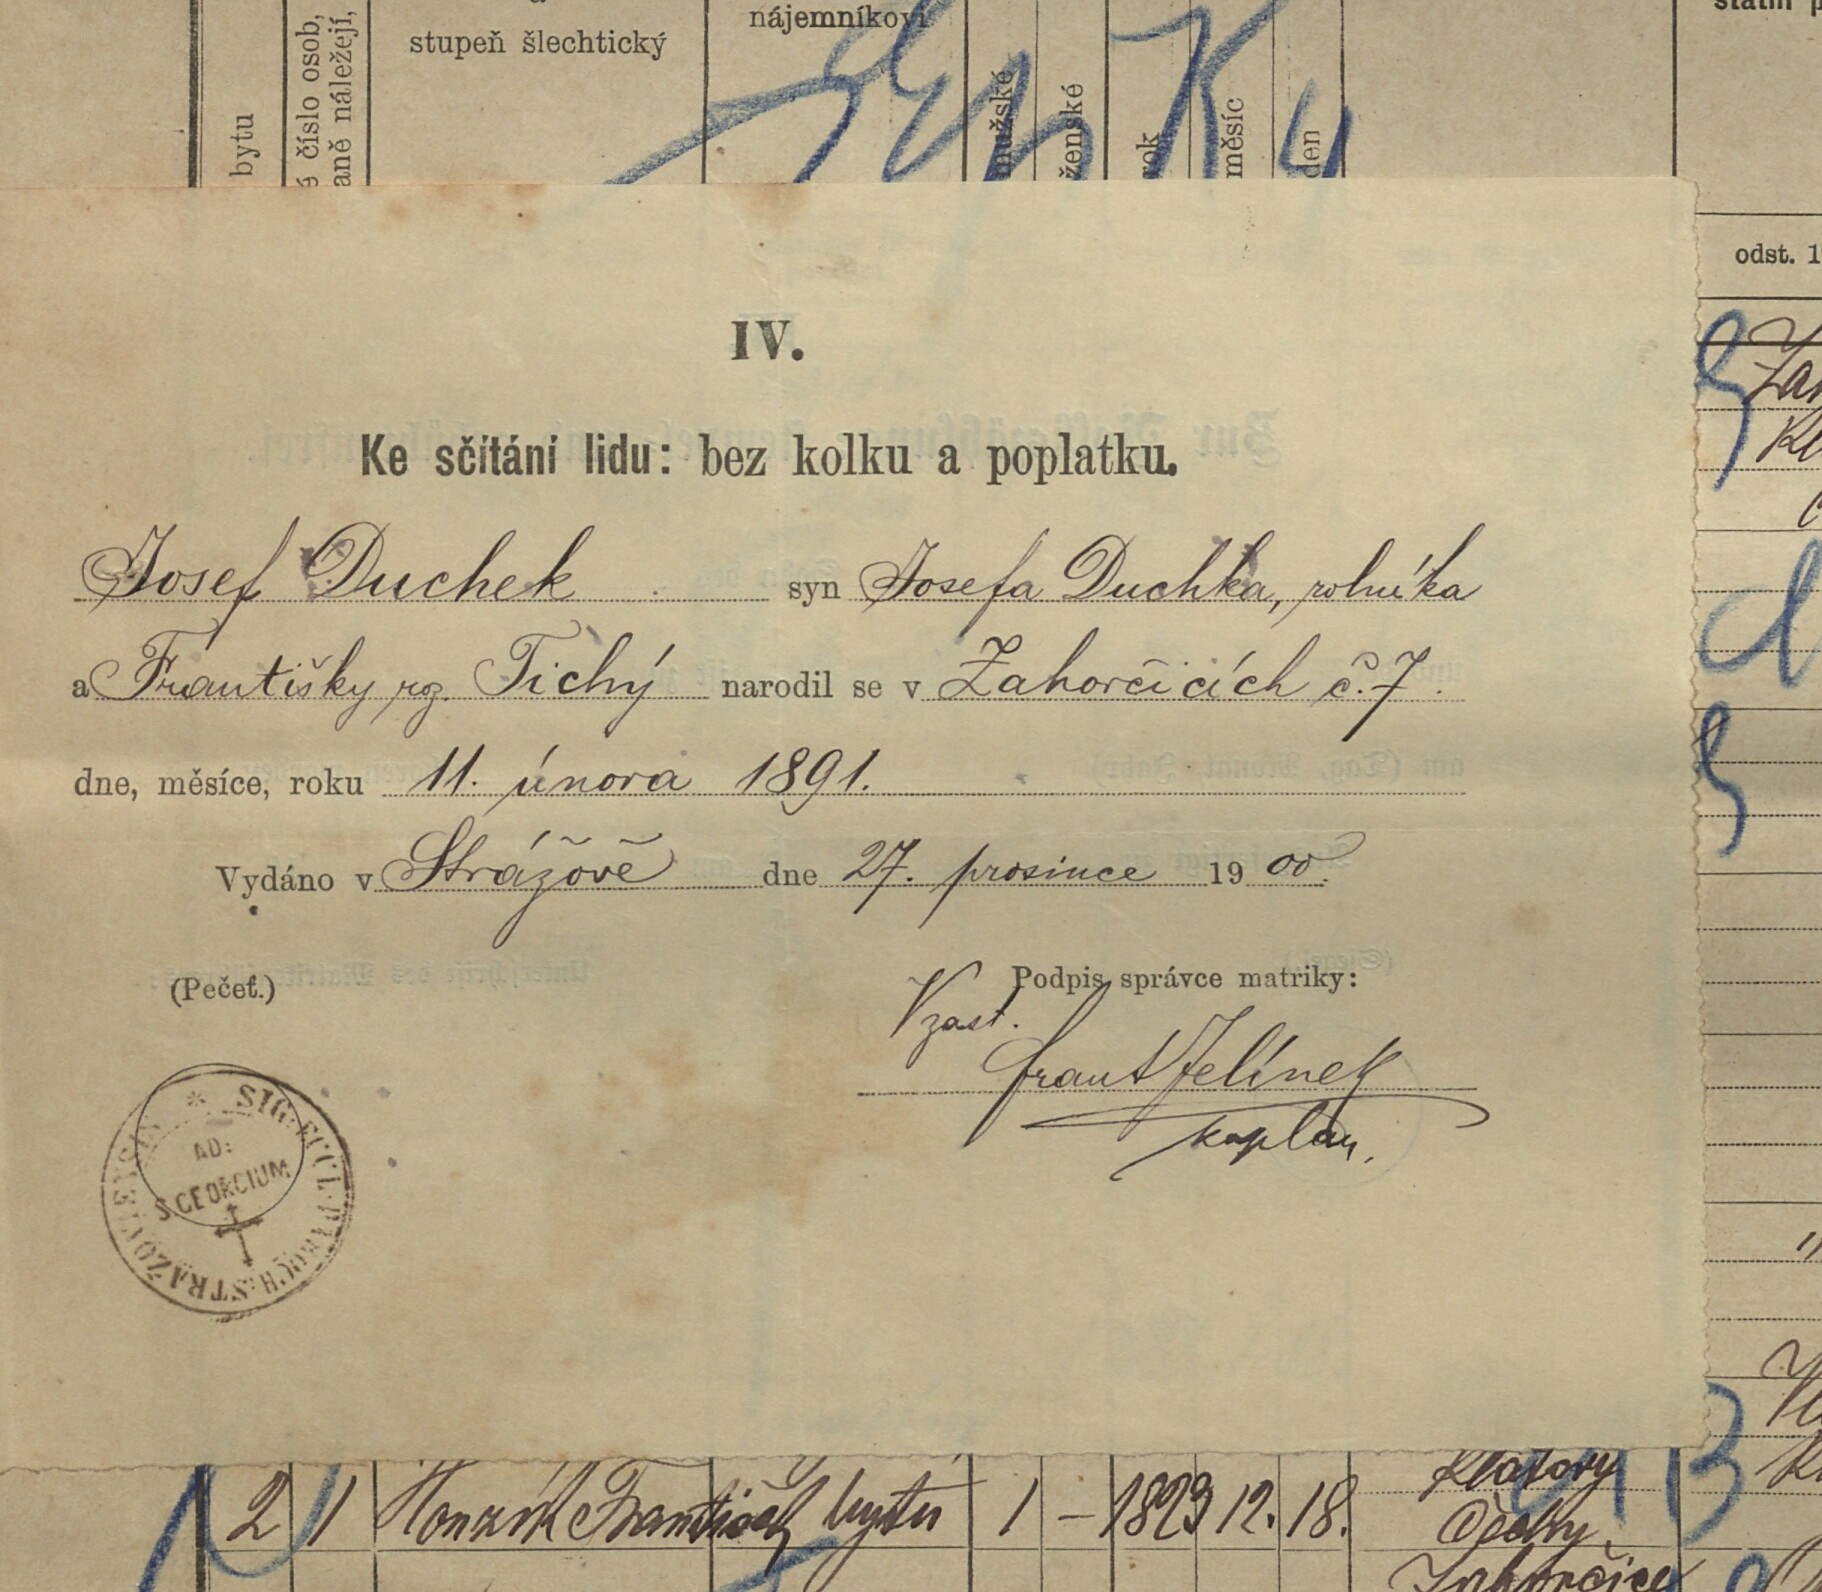 2. soap-kt_01159_census-1900-zahorcice-cp007_0020